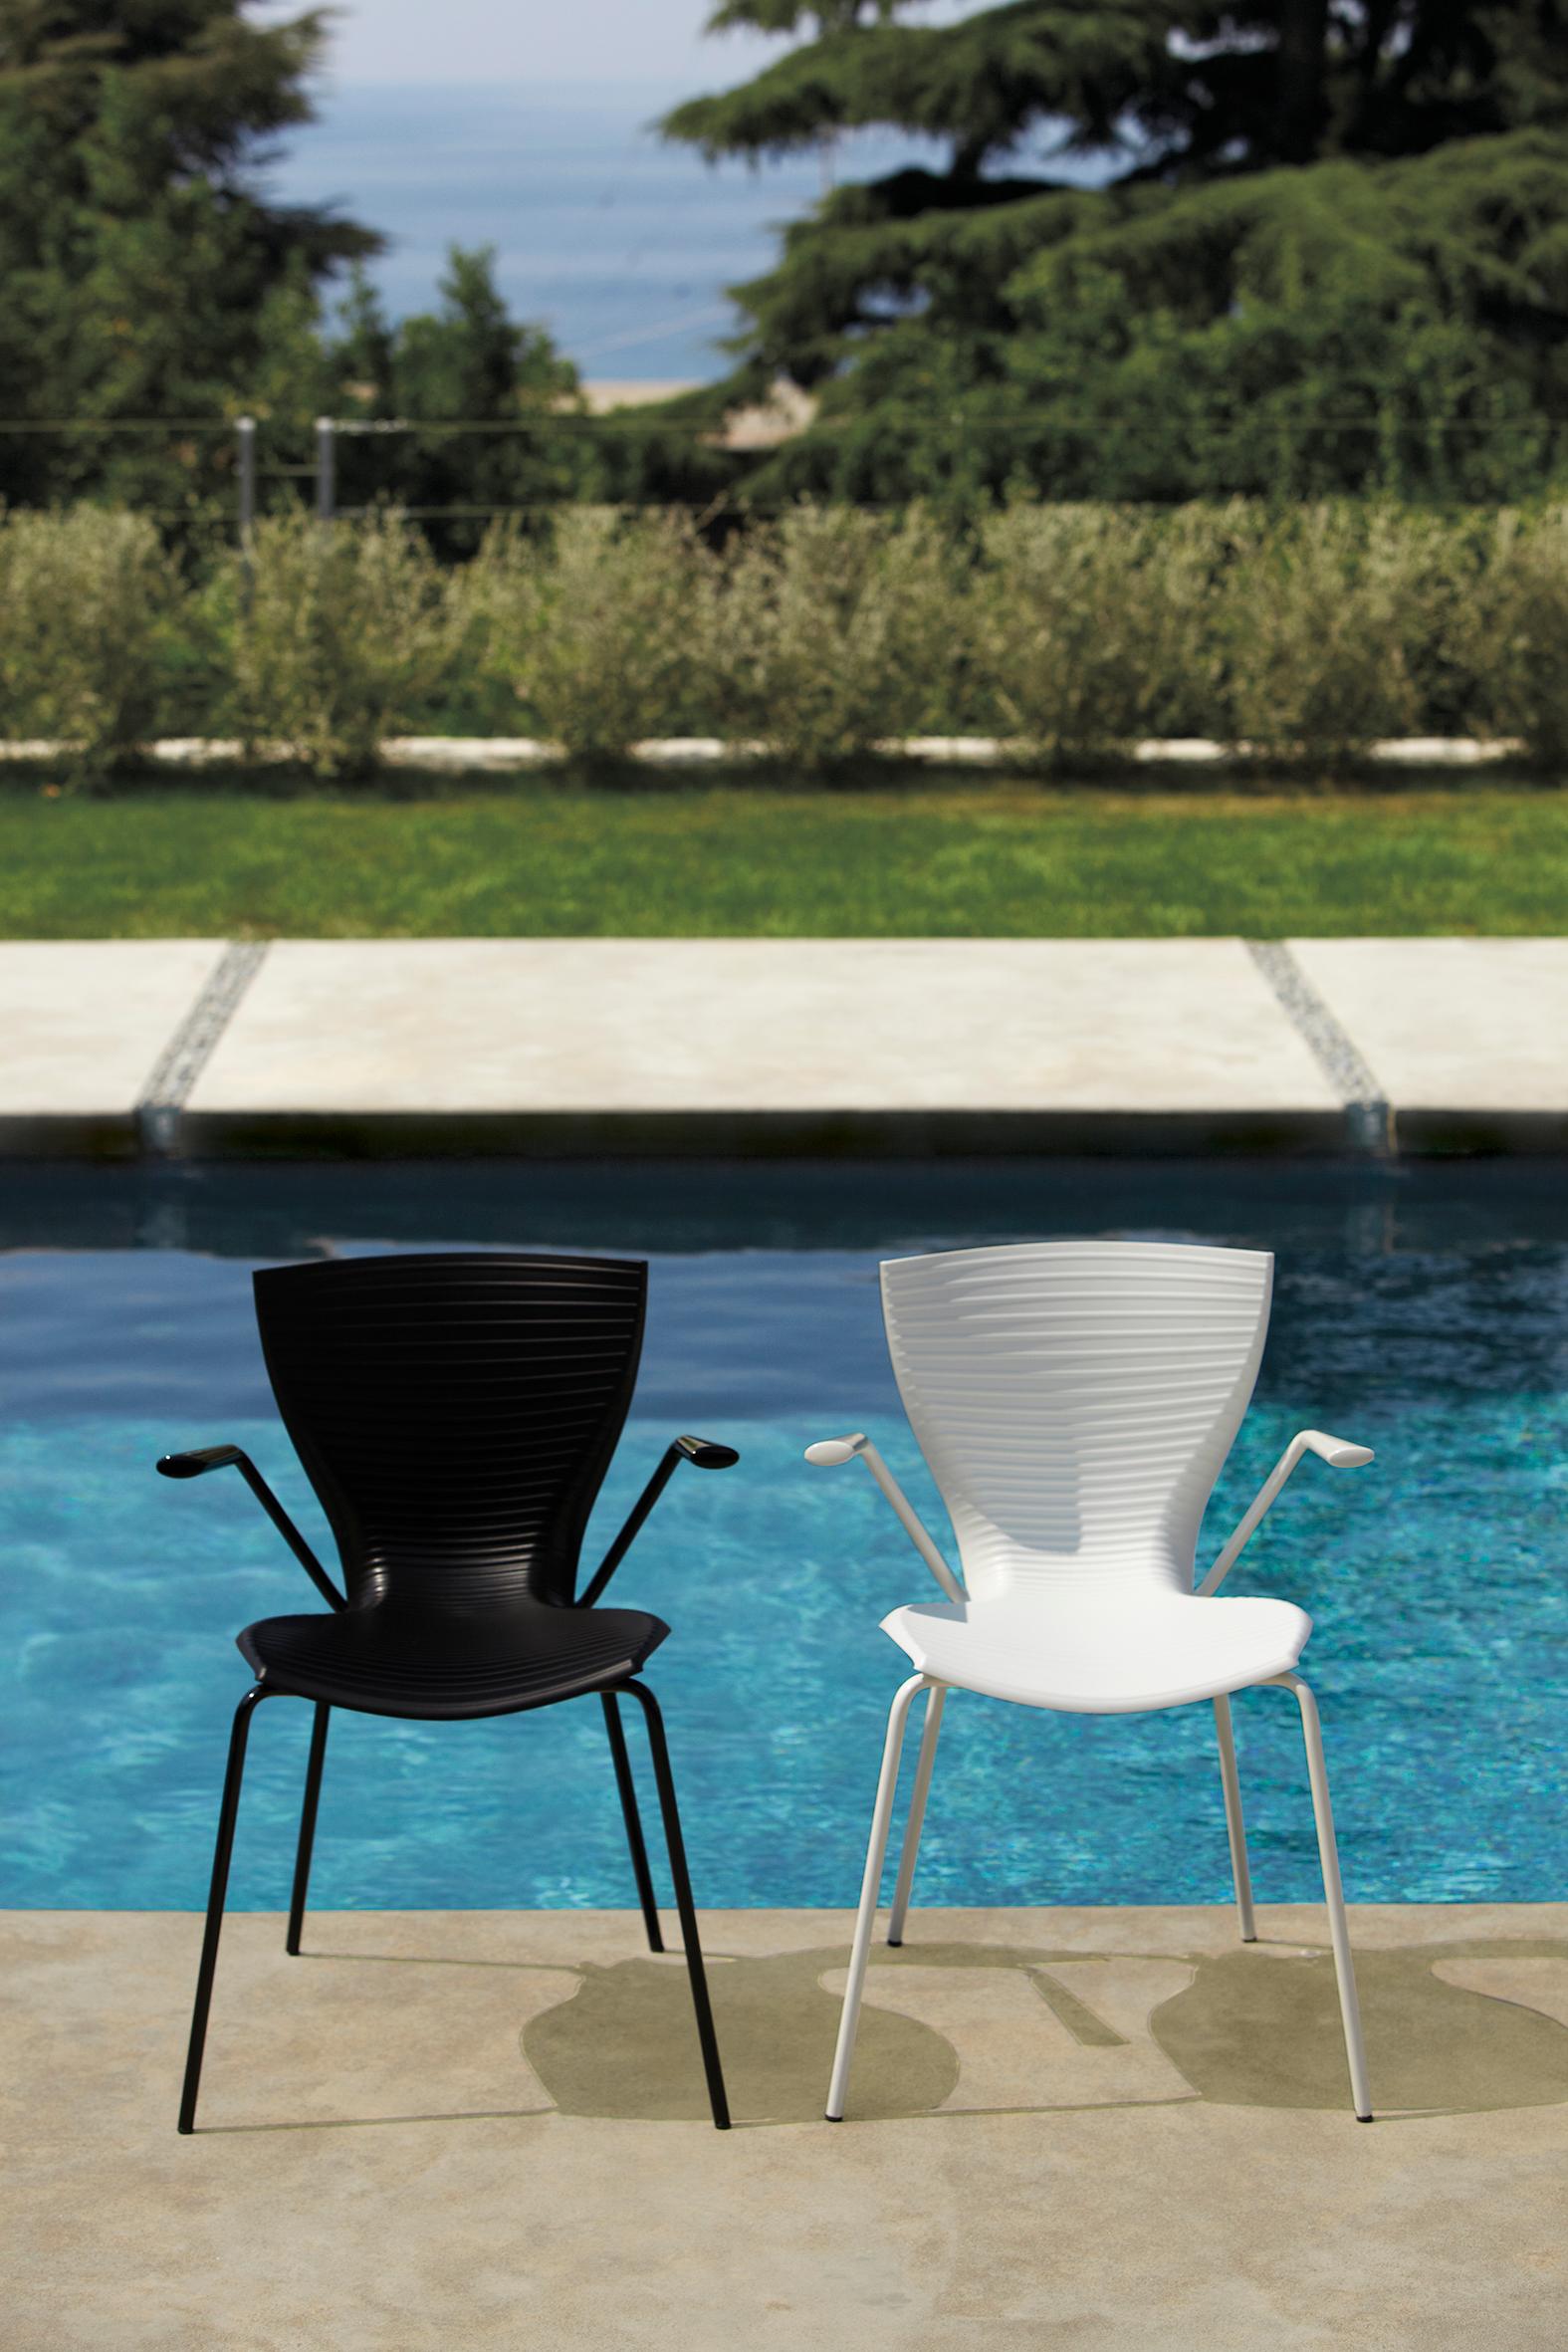 Gloria Meeting Chair by Marc Sadler
Dimensions: D 54 x W 60 x H 80 cm. Seat Height: 48 cm.
Materials: Polypropylene and steel chassis.
Weight: 6 kg.

Available in two different color options: white or black. This product is suitable for indoor and